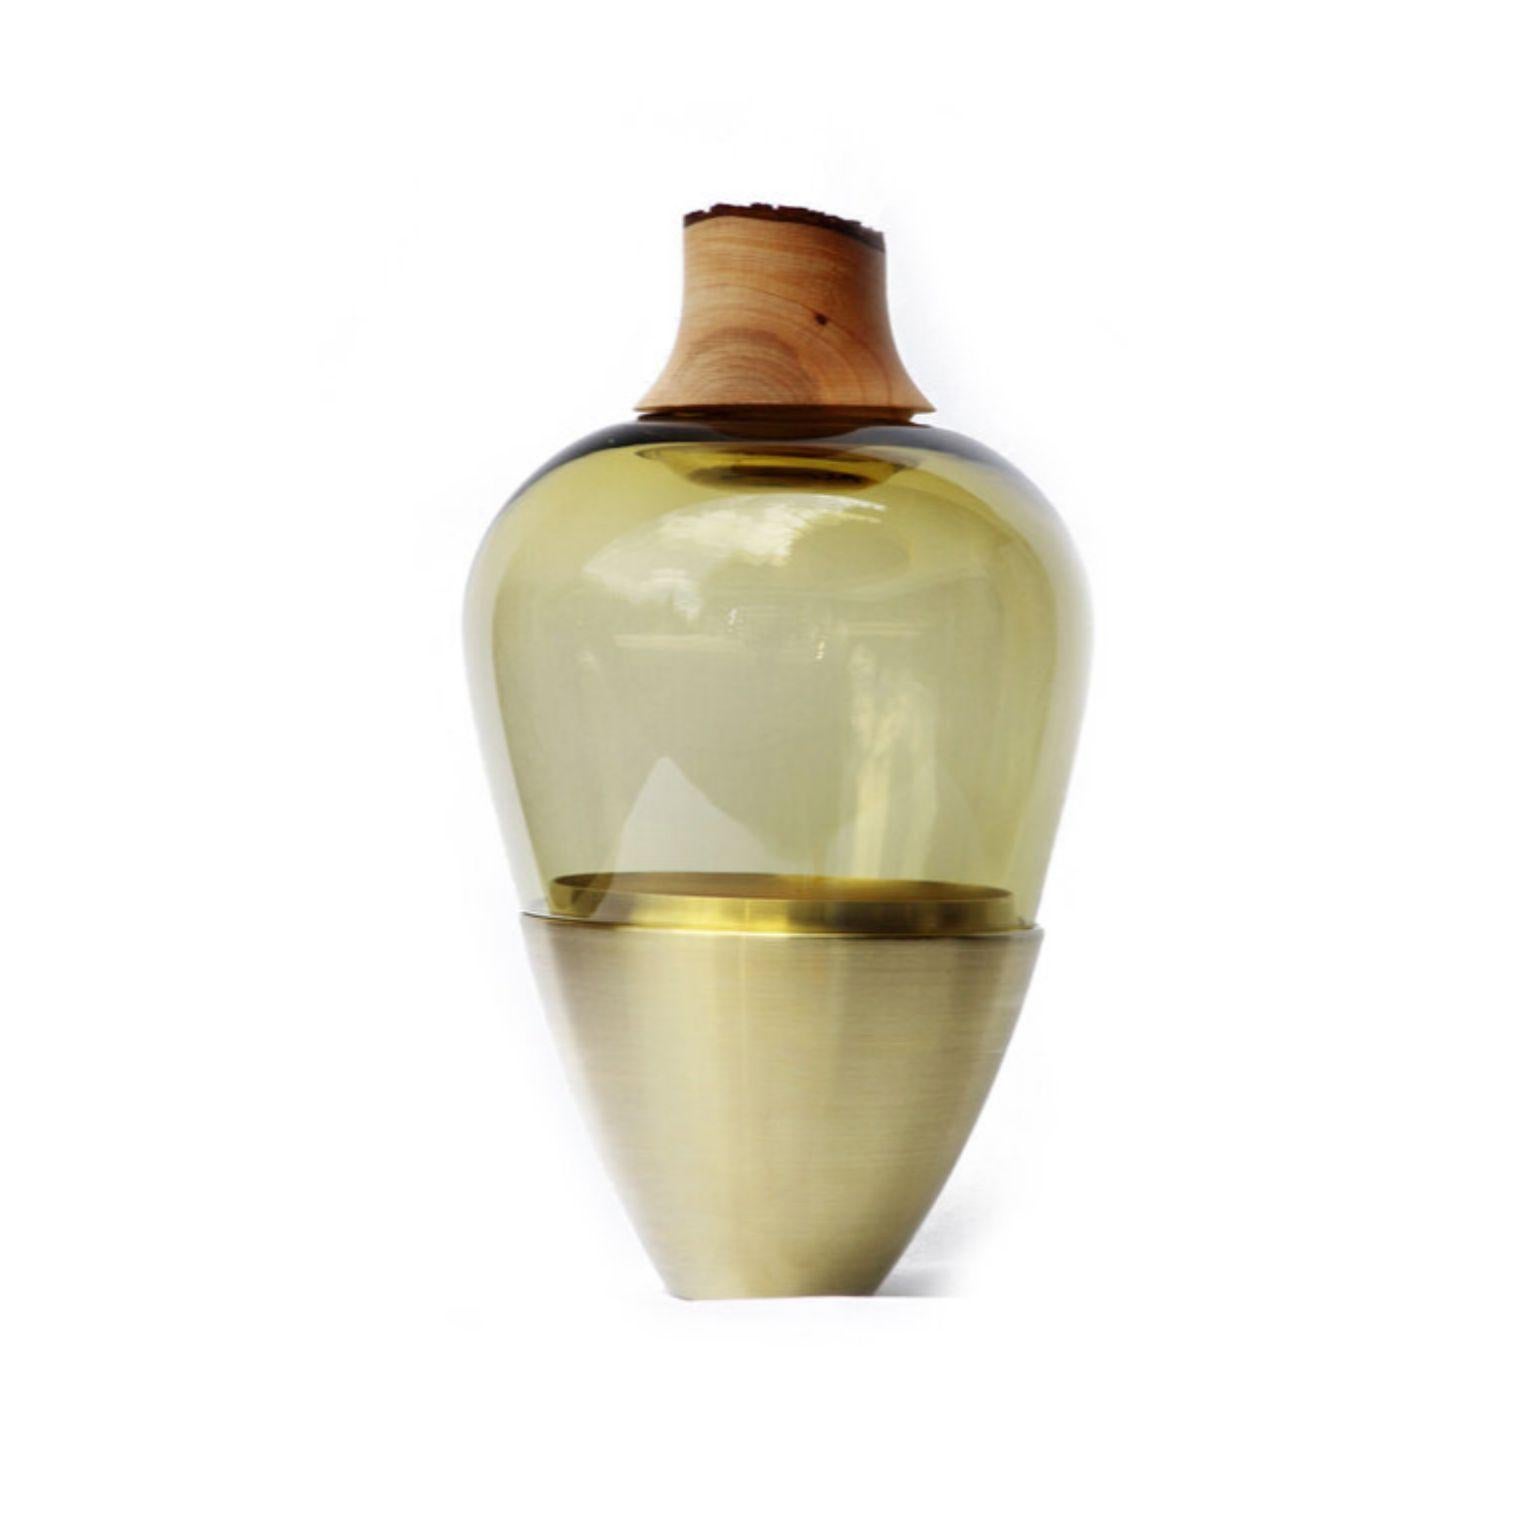 Olive and Brass Sculpted Blown Glass India Stacking Vessel, Pia Wüstenberg
Dimensions: height 20 x diameter 38cm
Materials: hand blown glass, brass

Pia Wüstenberg, Utopia
Pia Wüstenberg is a creative with a passion for materials and craft. She